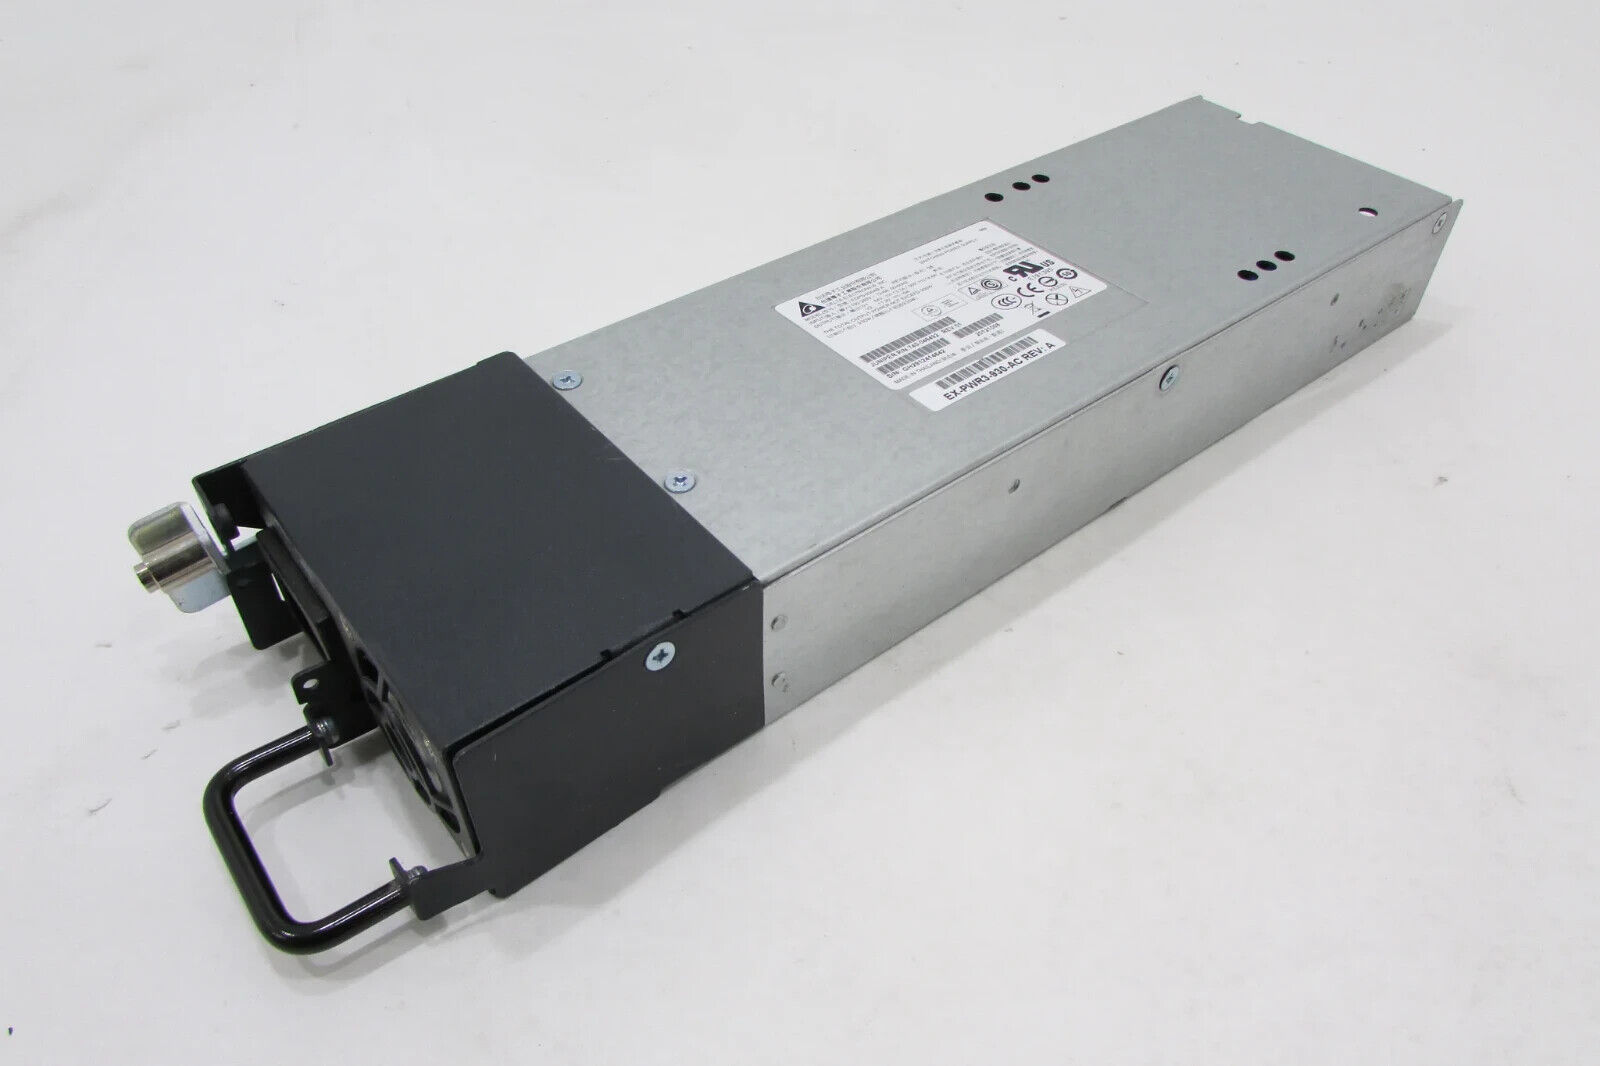 Juniper EX-PWR3-930-AC Spare 930W AC Power Supply for EX4200 EX3200 Switches